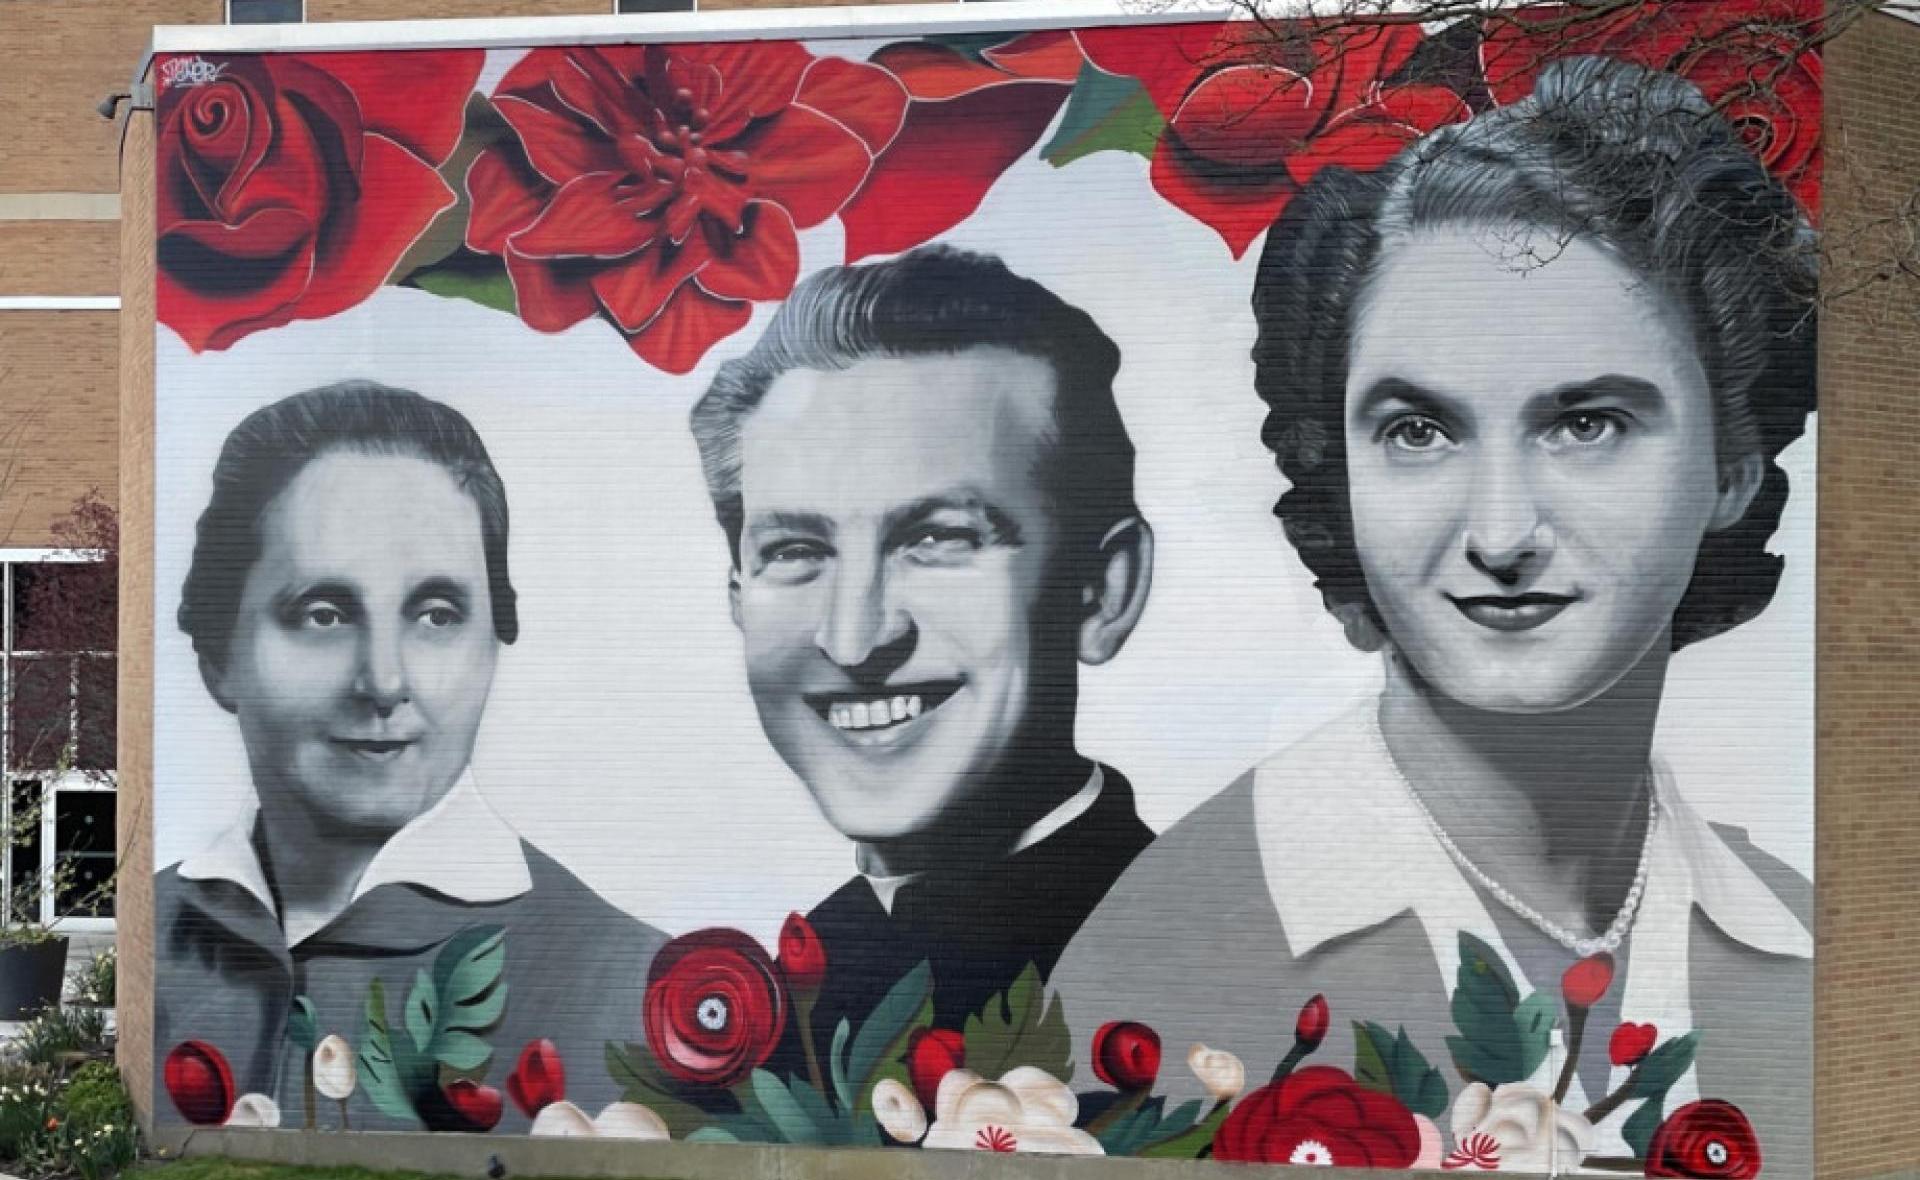 New mural on the wall of a US oncology centre depicts Hungarian lifesaving heroes